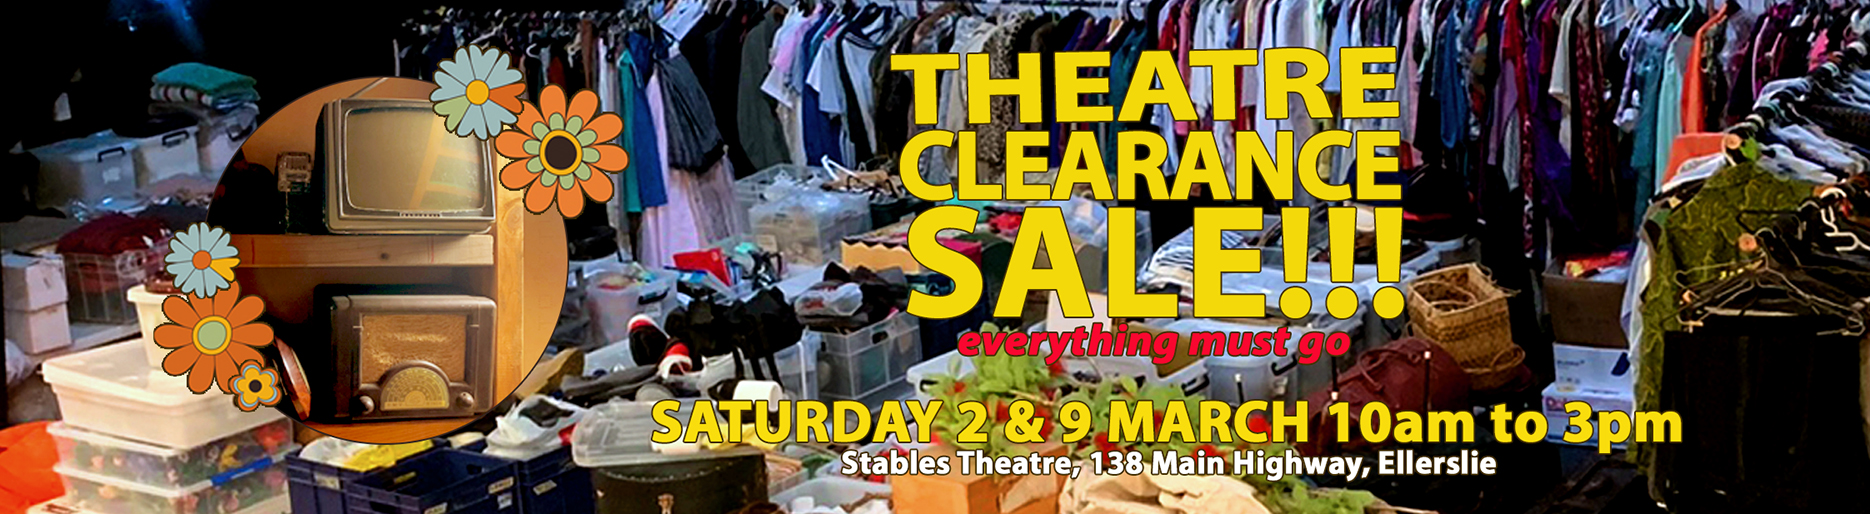 Theatre Clearance Sale